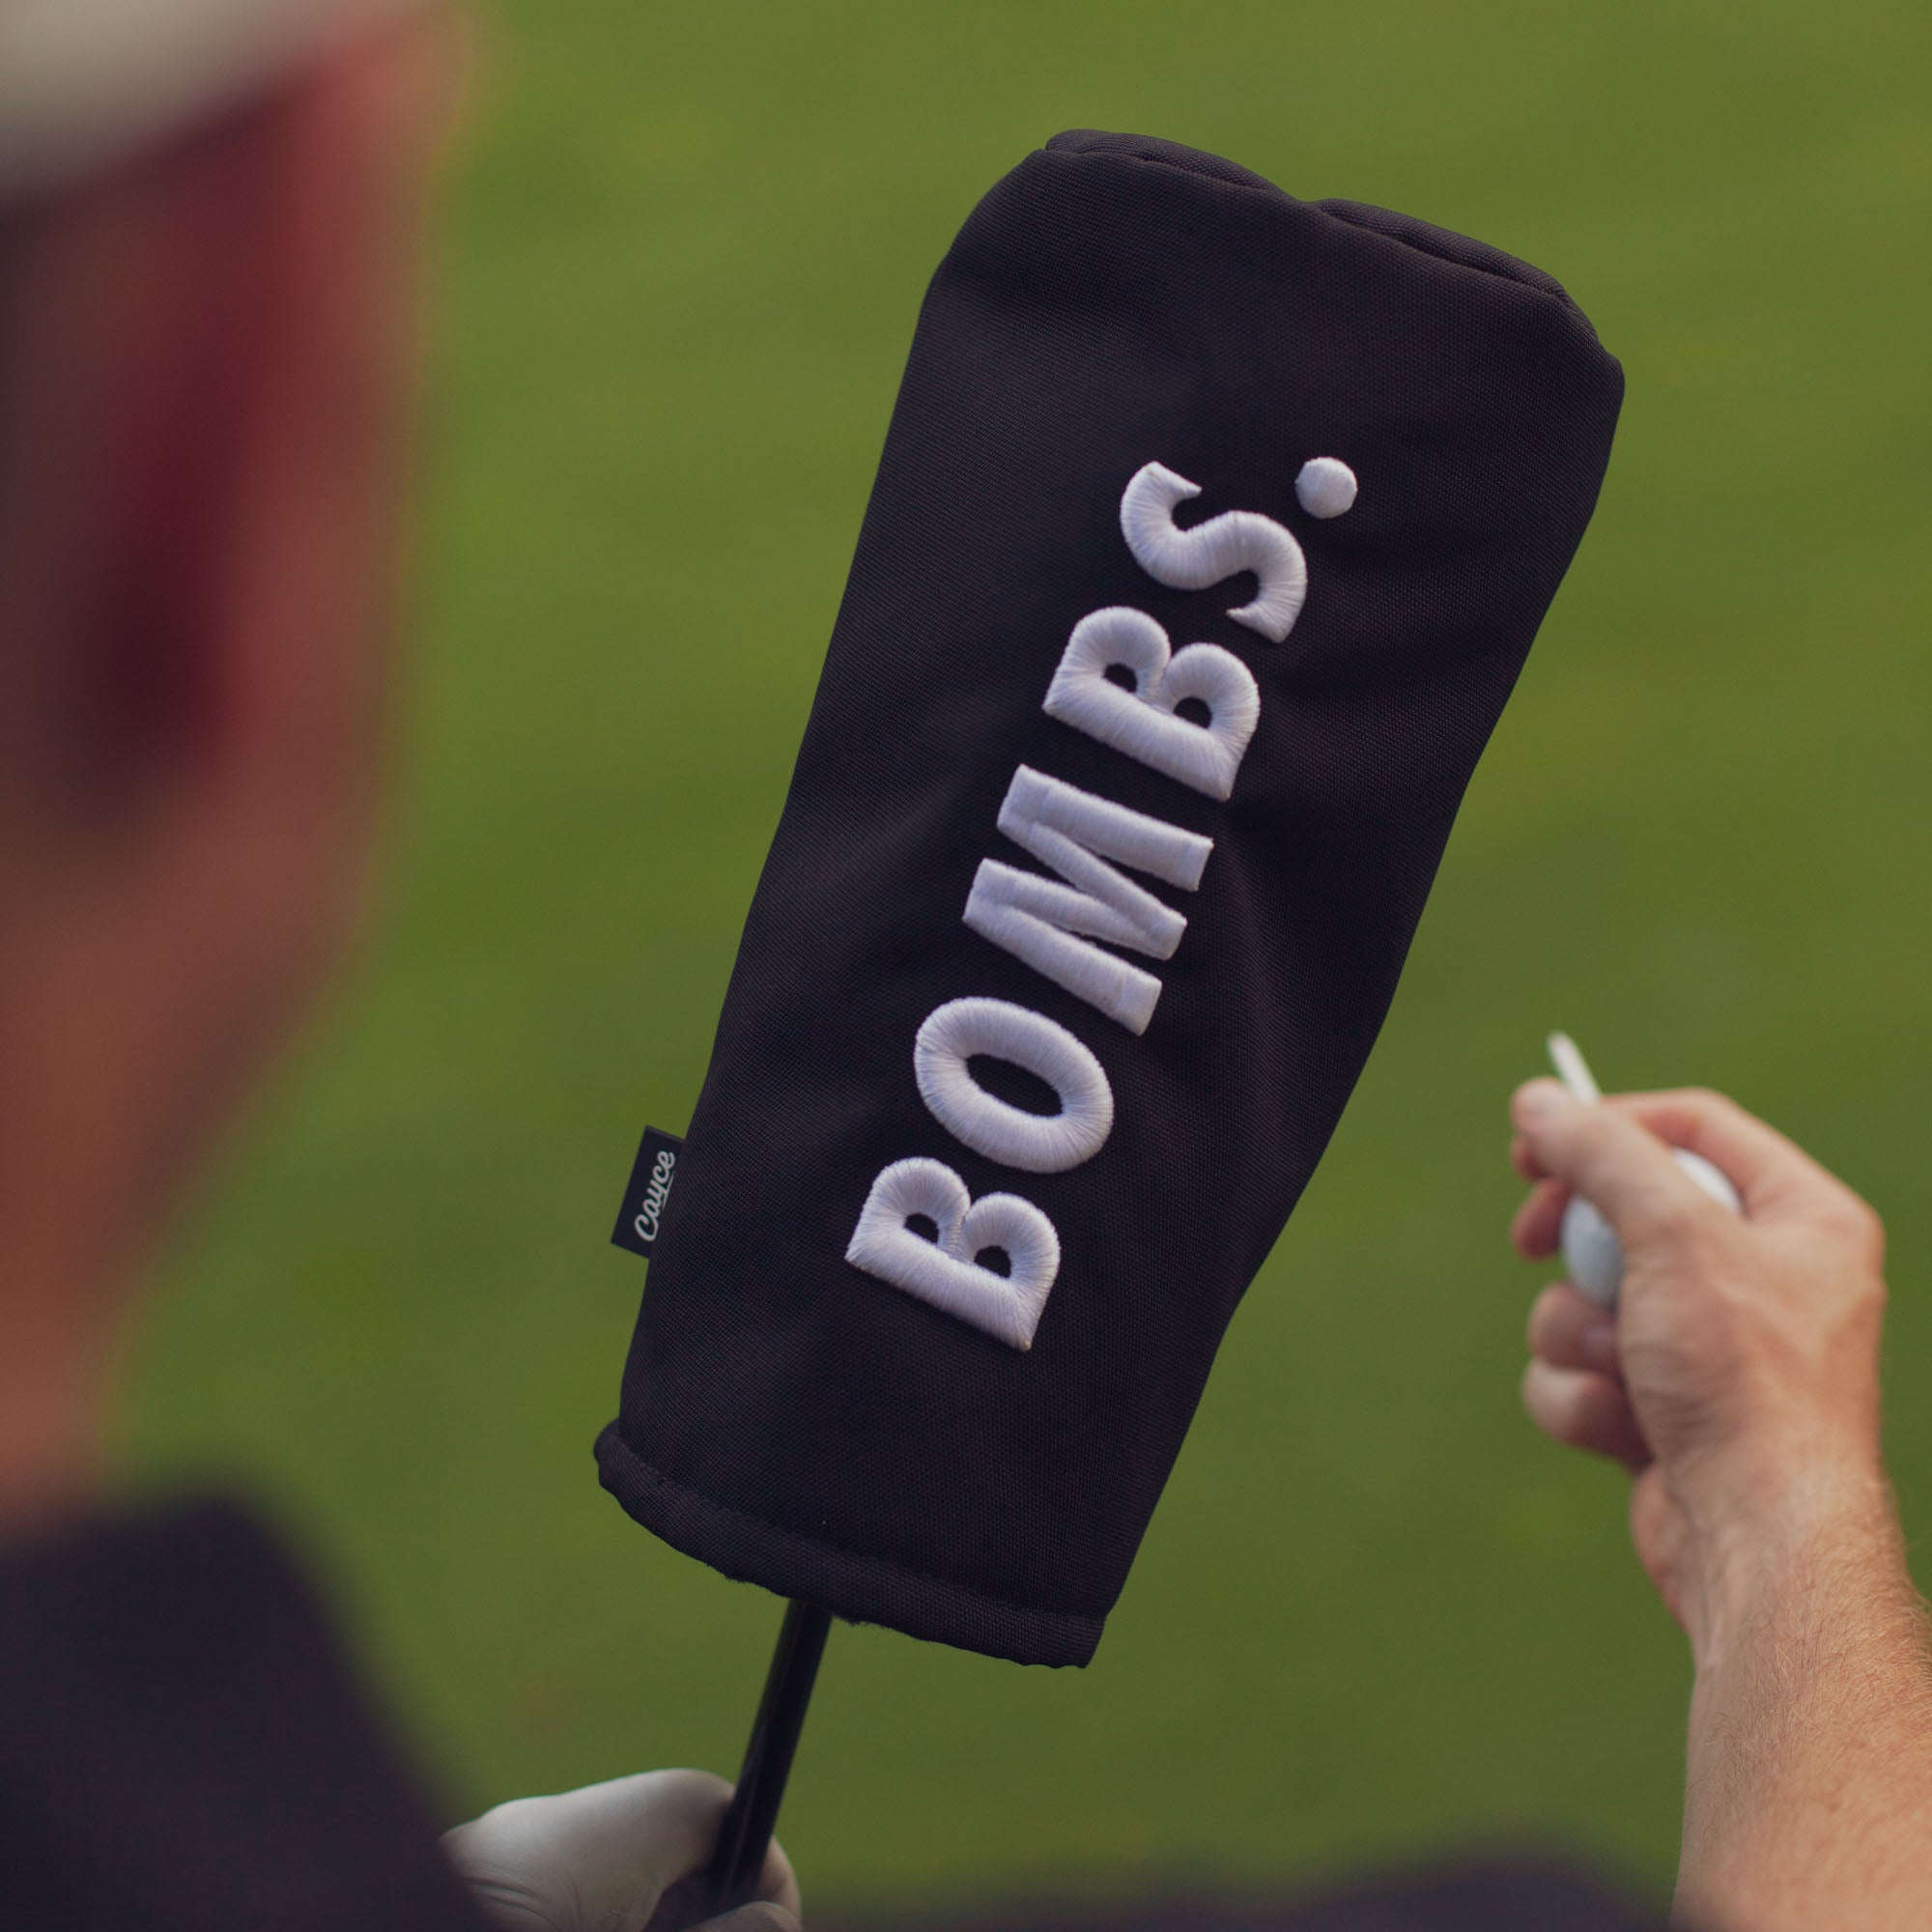 over the shoulder picture of a golfer holding a black driver head cover with 3D puff embroidered text "BOMBS." in white